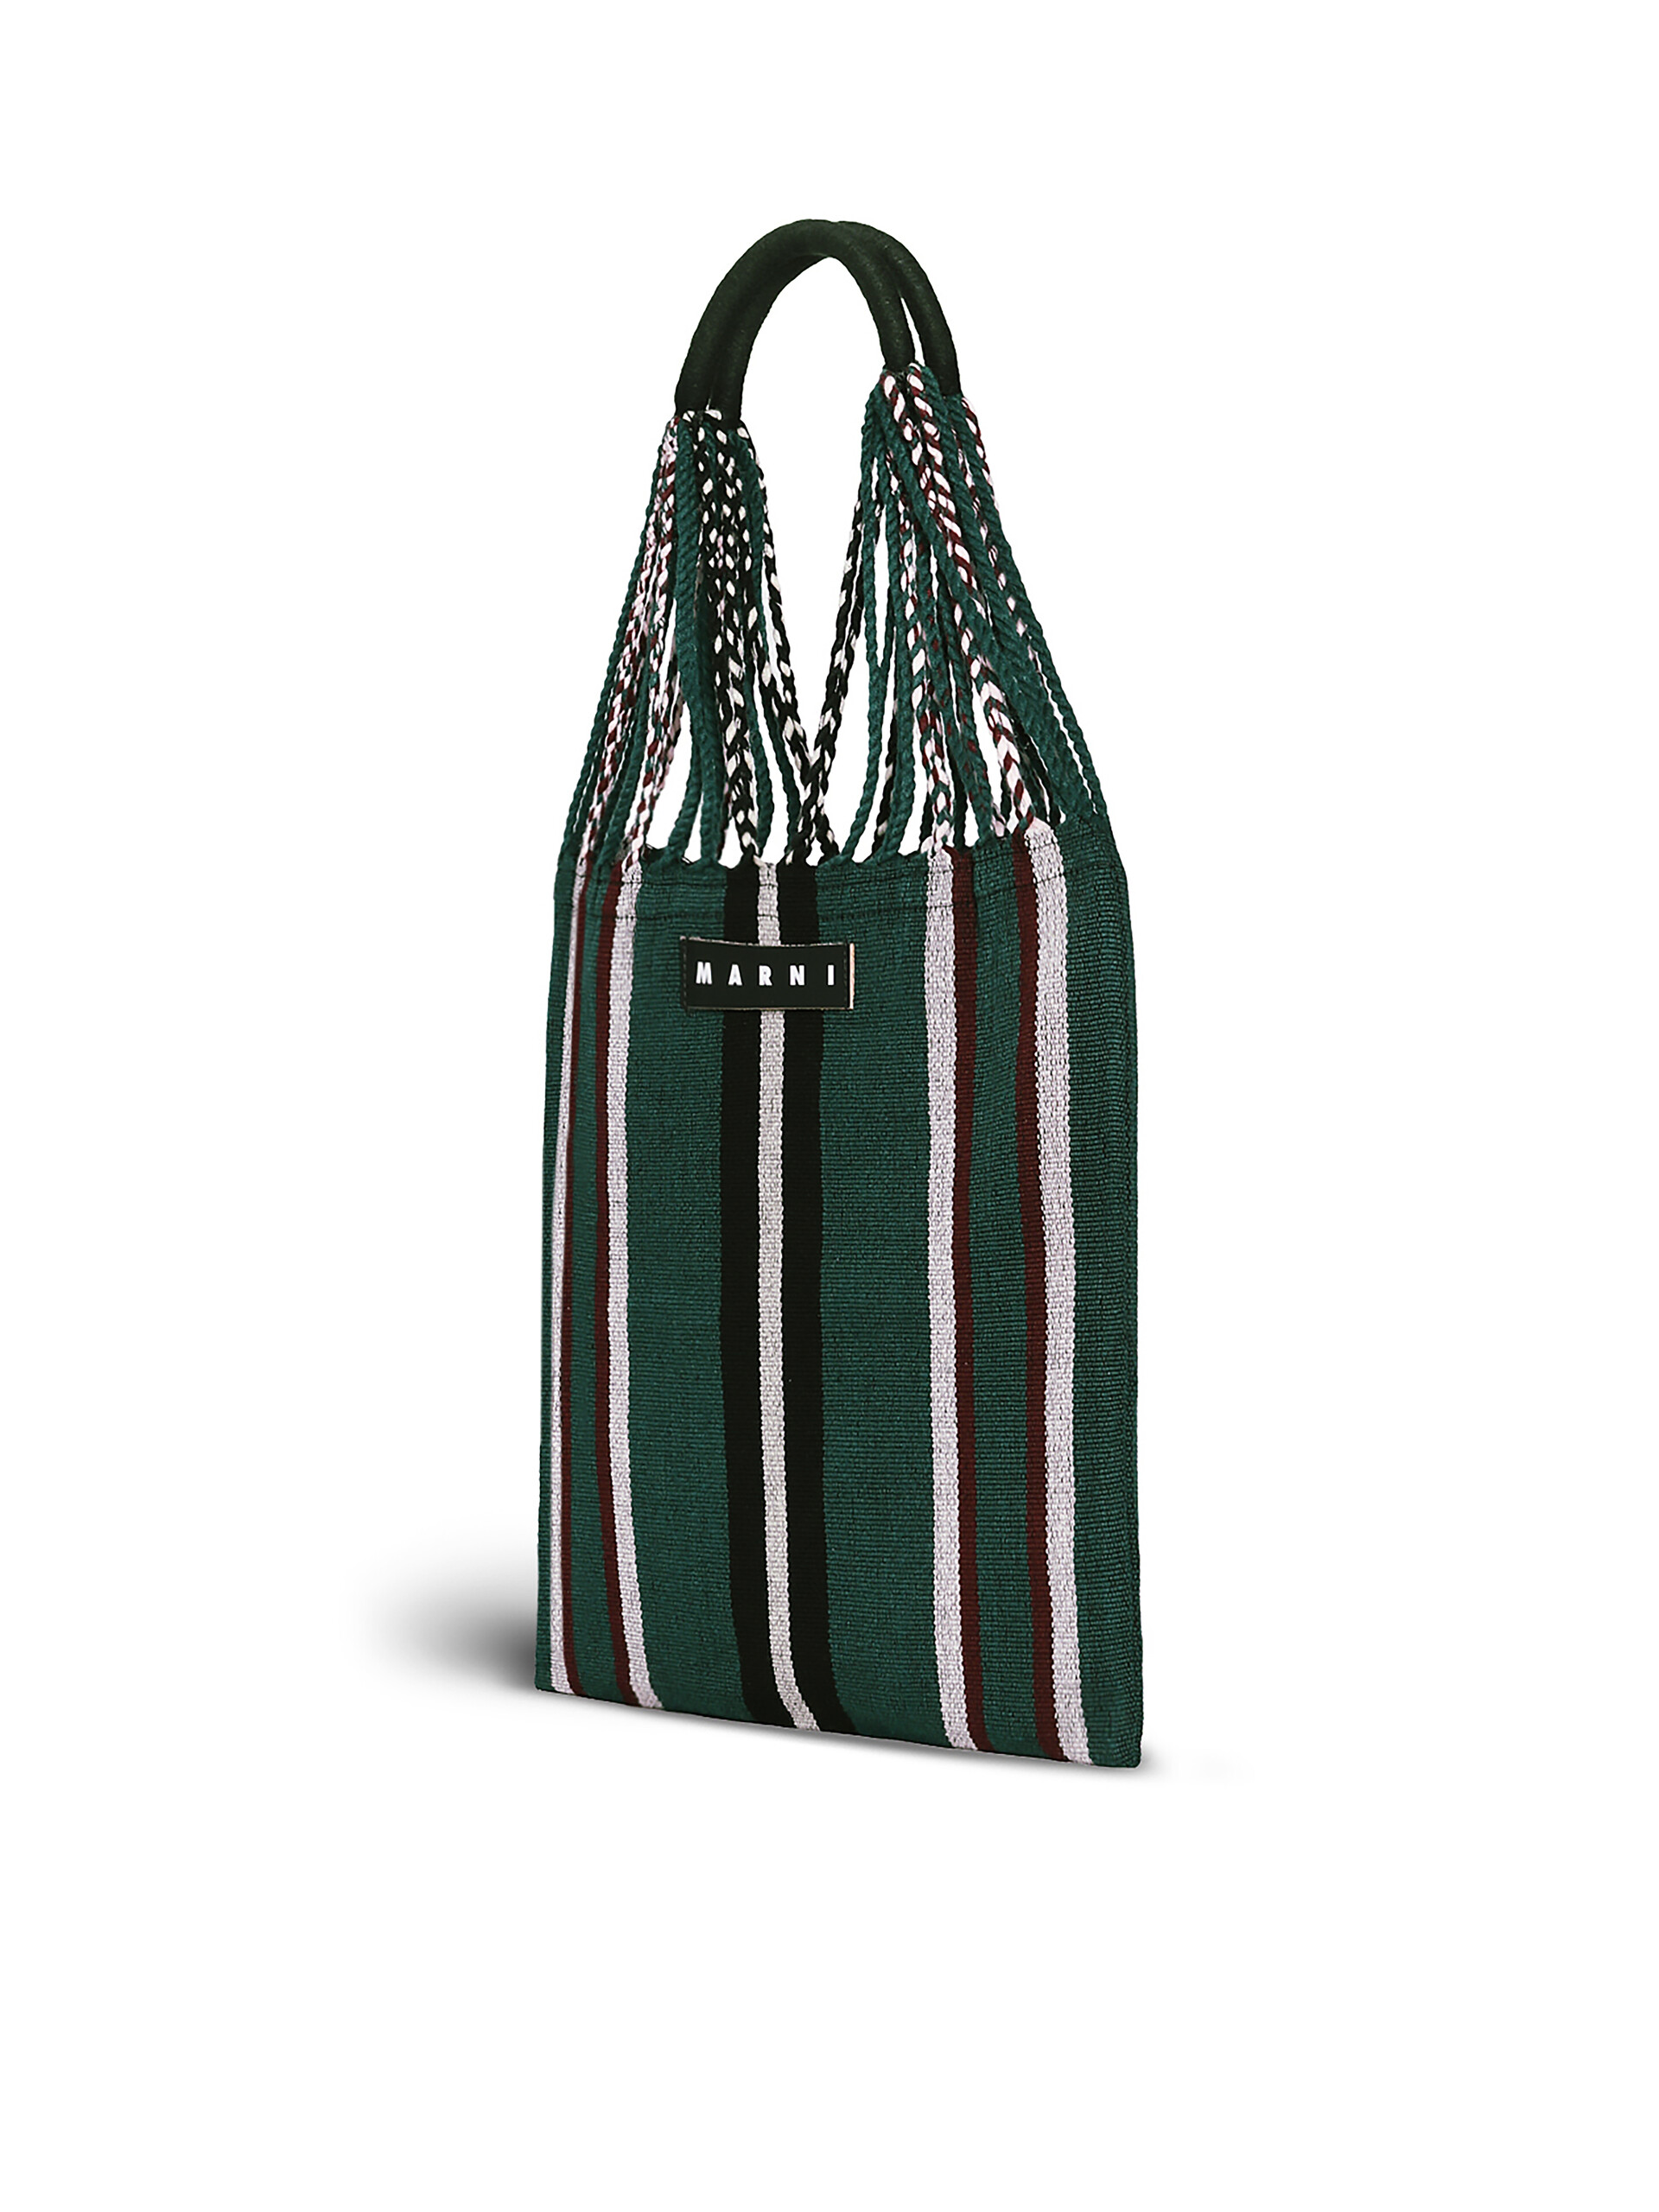 MARNI MARKET shopping bag in polyester with hammock-like handle grey turquoise and red - Bags - Image 2